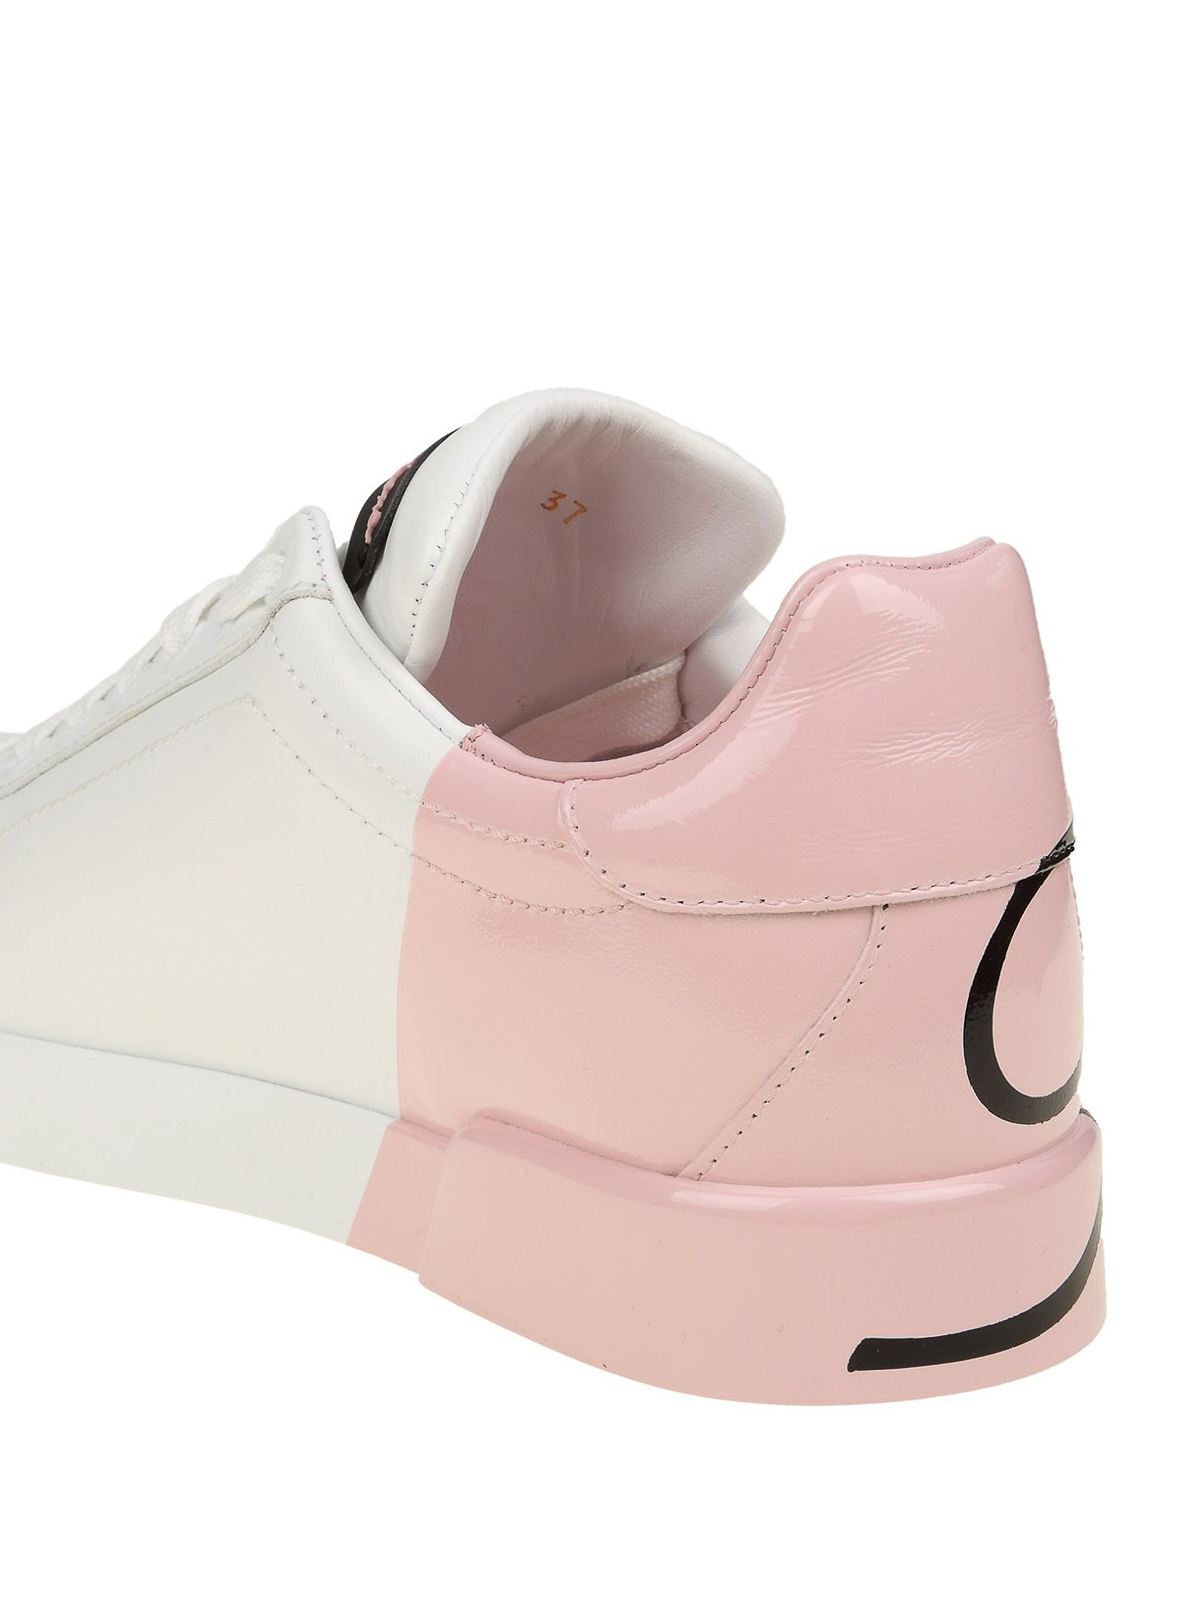 dolce and gabbana pink and white trainers